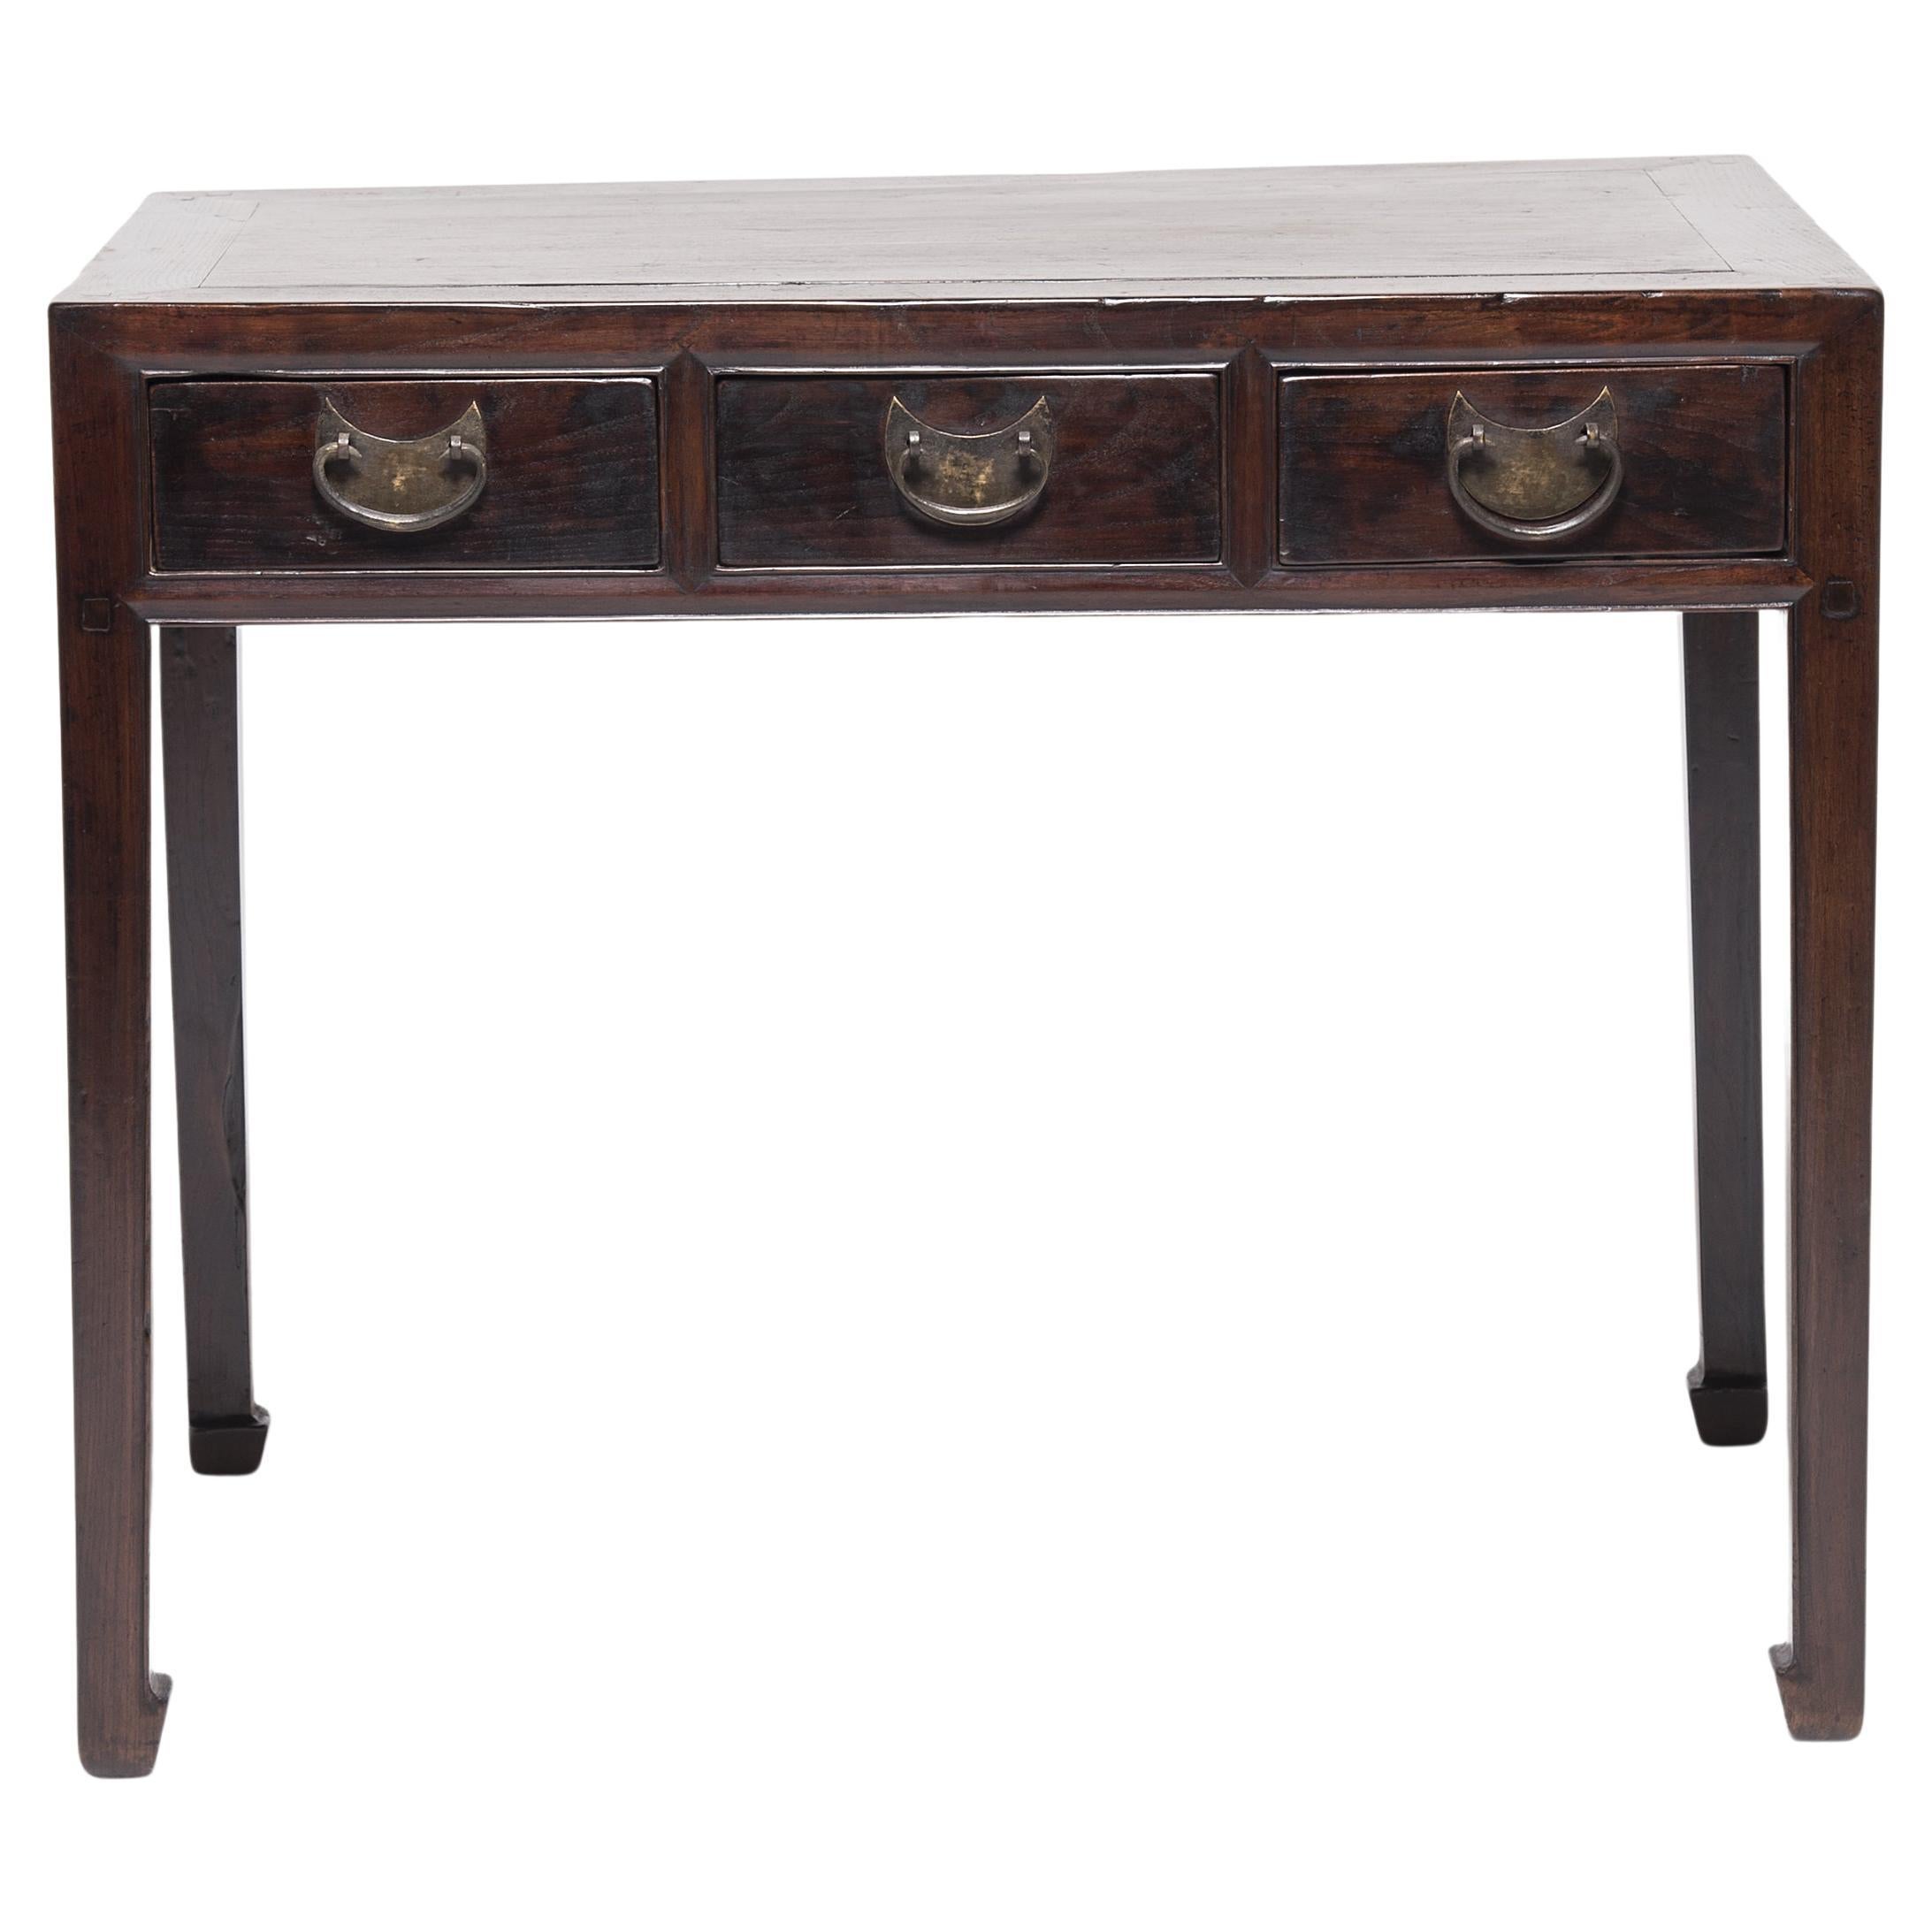 Chinese Three Drawer Table with Half Moon Pulls, C. 1850